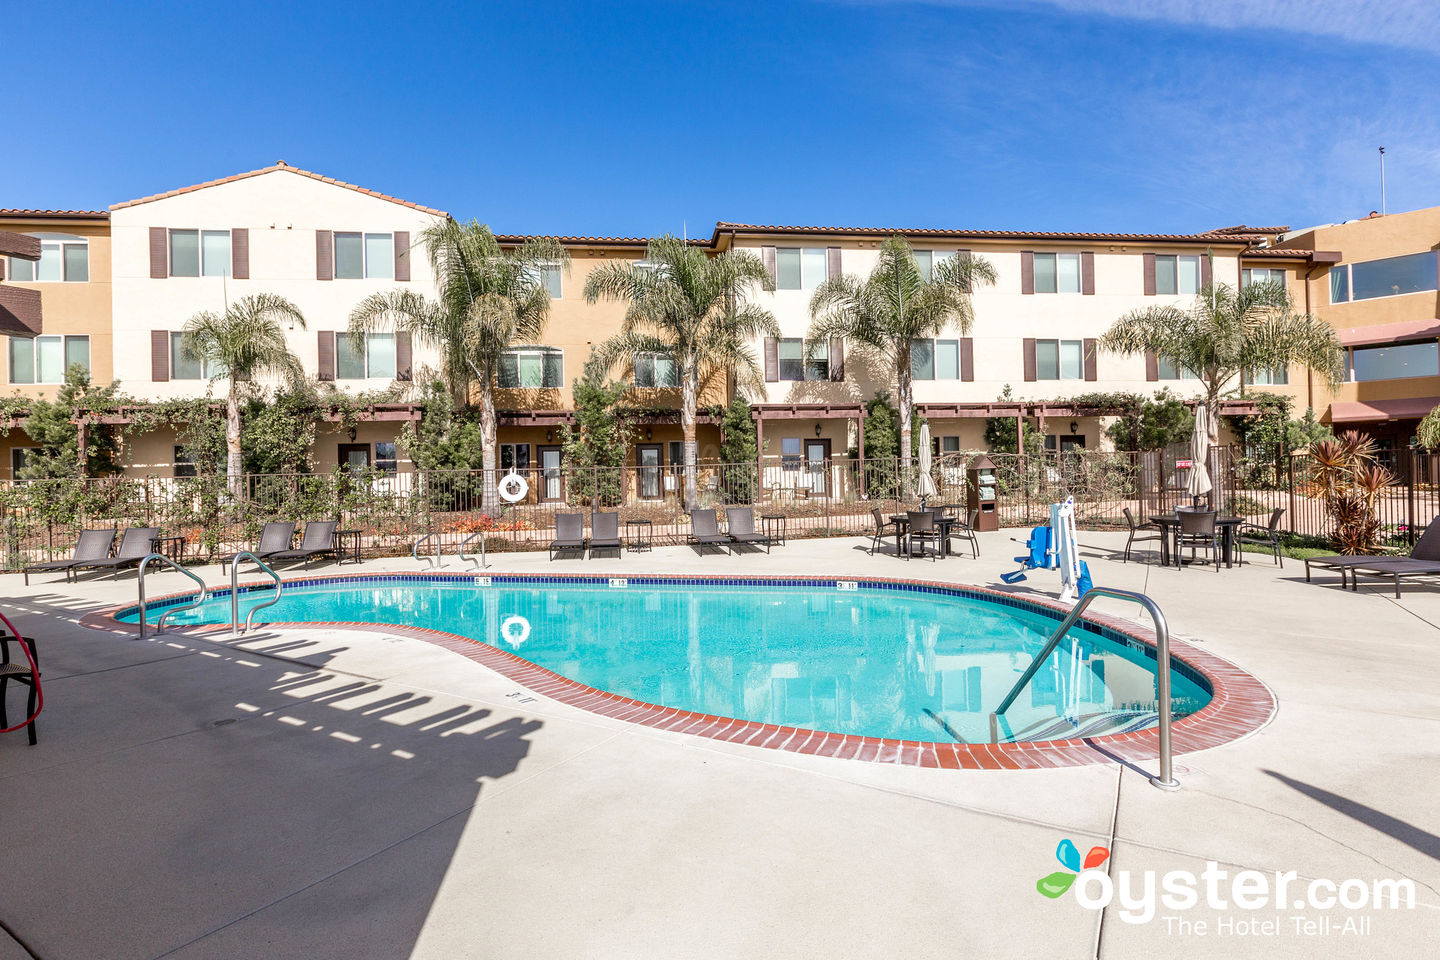 Hilton Garden Inn Pismo Beach Review What To Really Expect If You